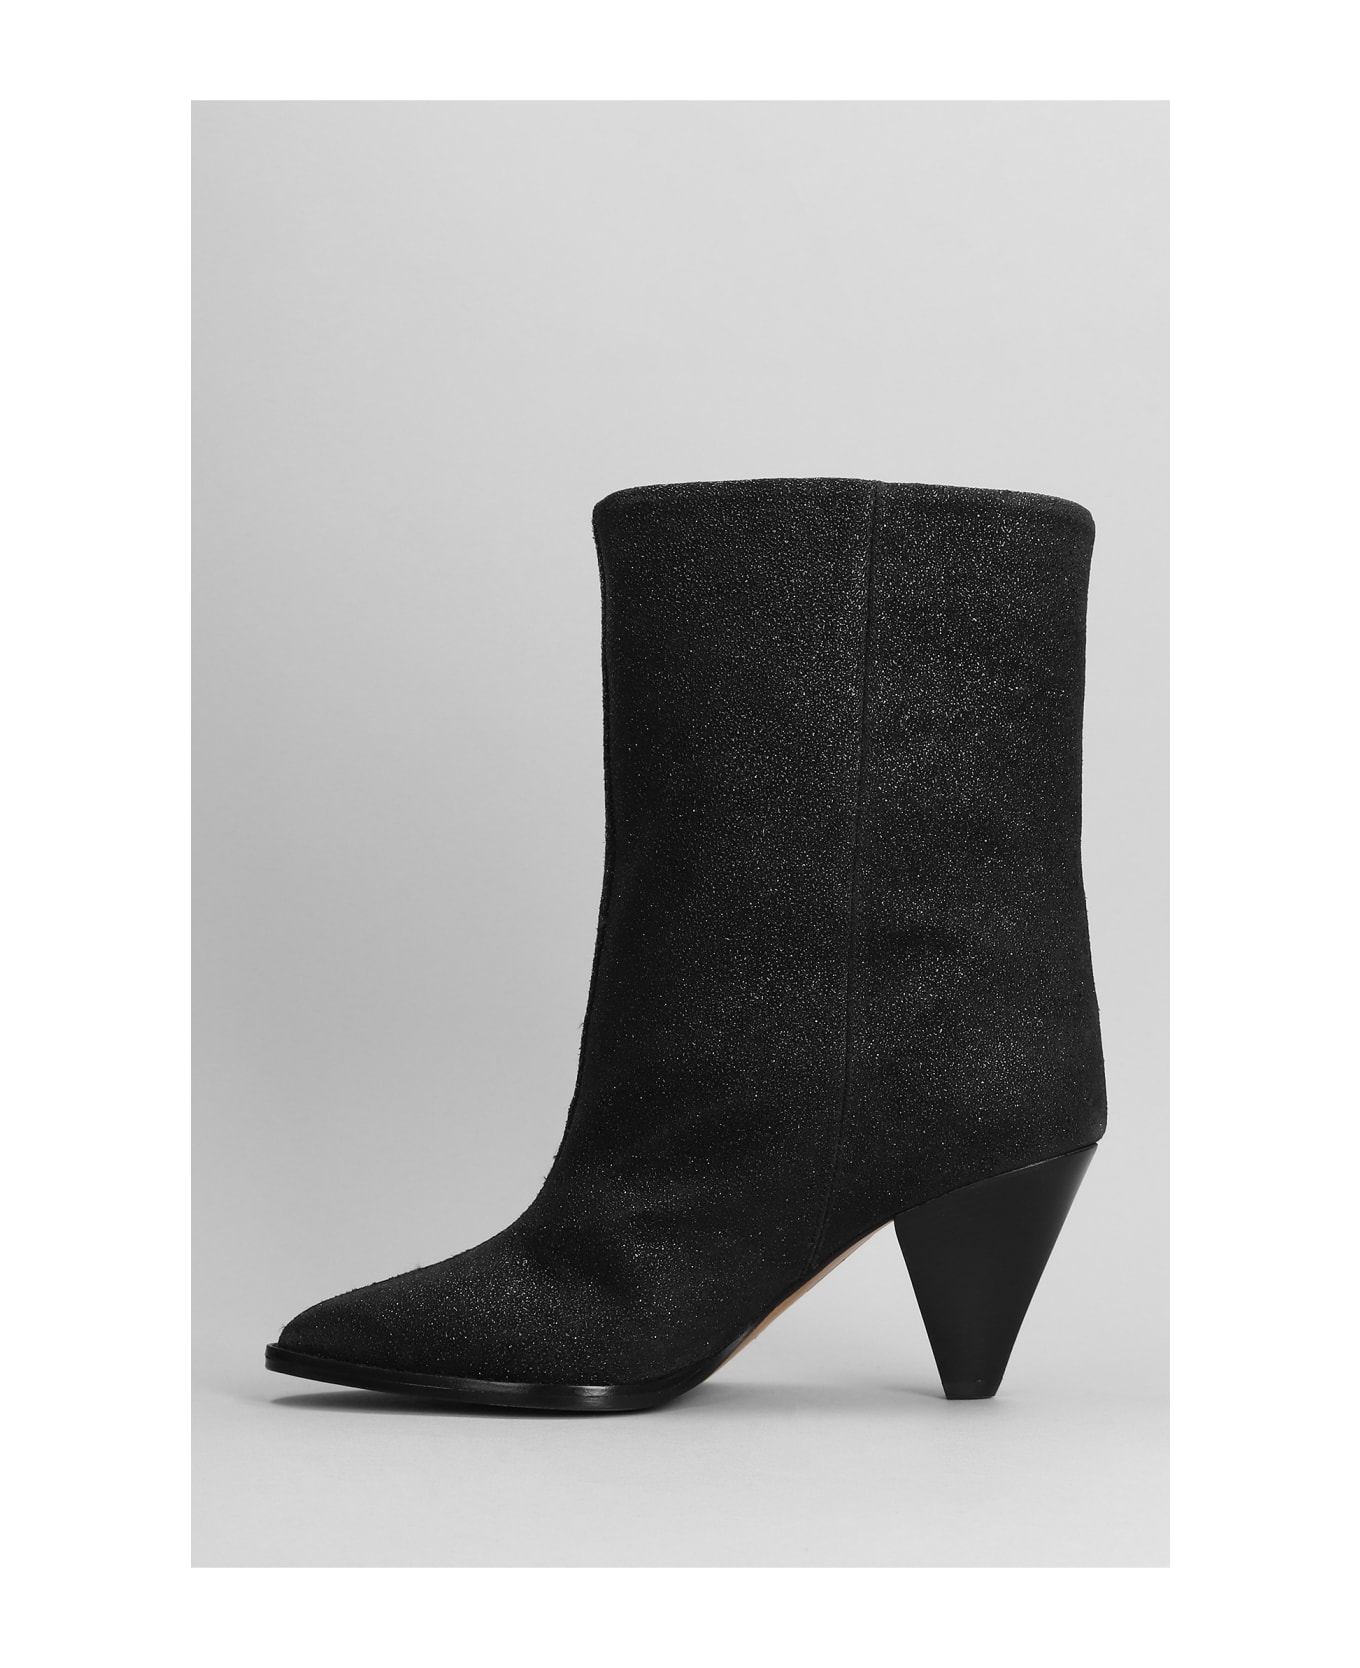 Isabel Marant Rouxa High Heels Ankle Boots In Black Glitter - black